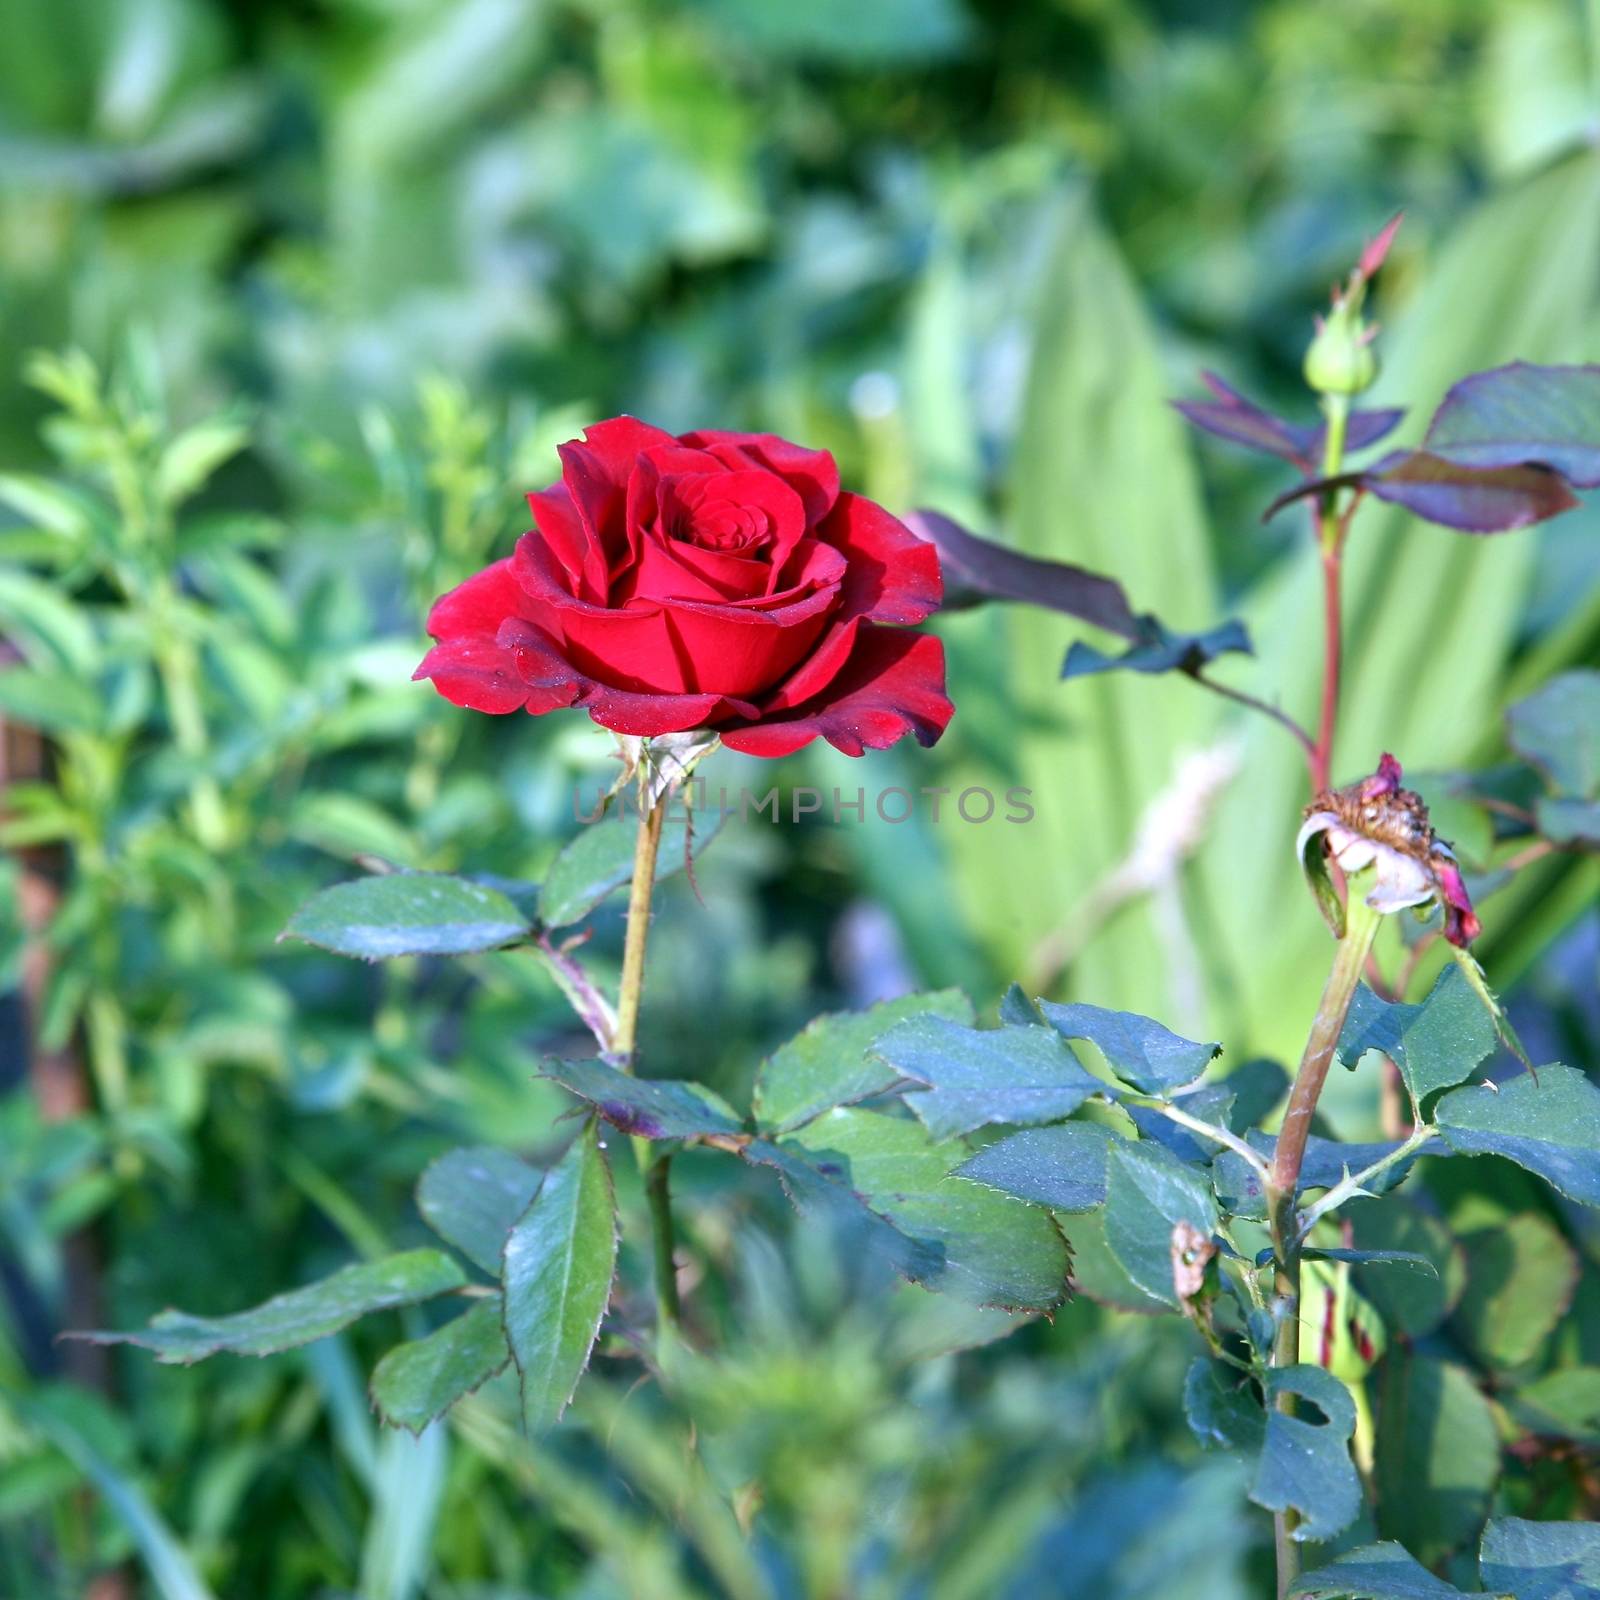 Rose bud in the garden over natural background by valerypetr